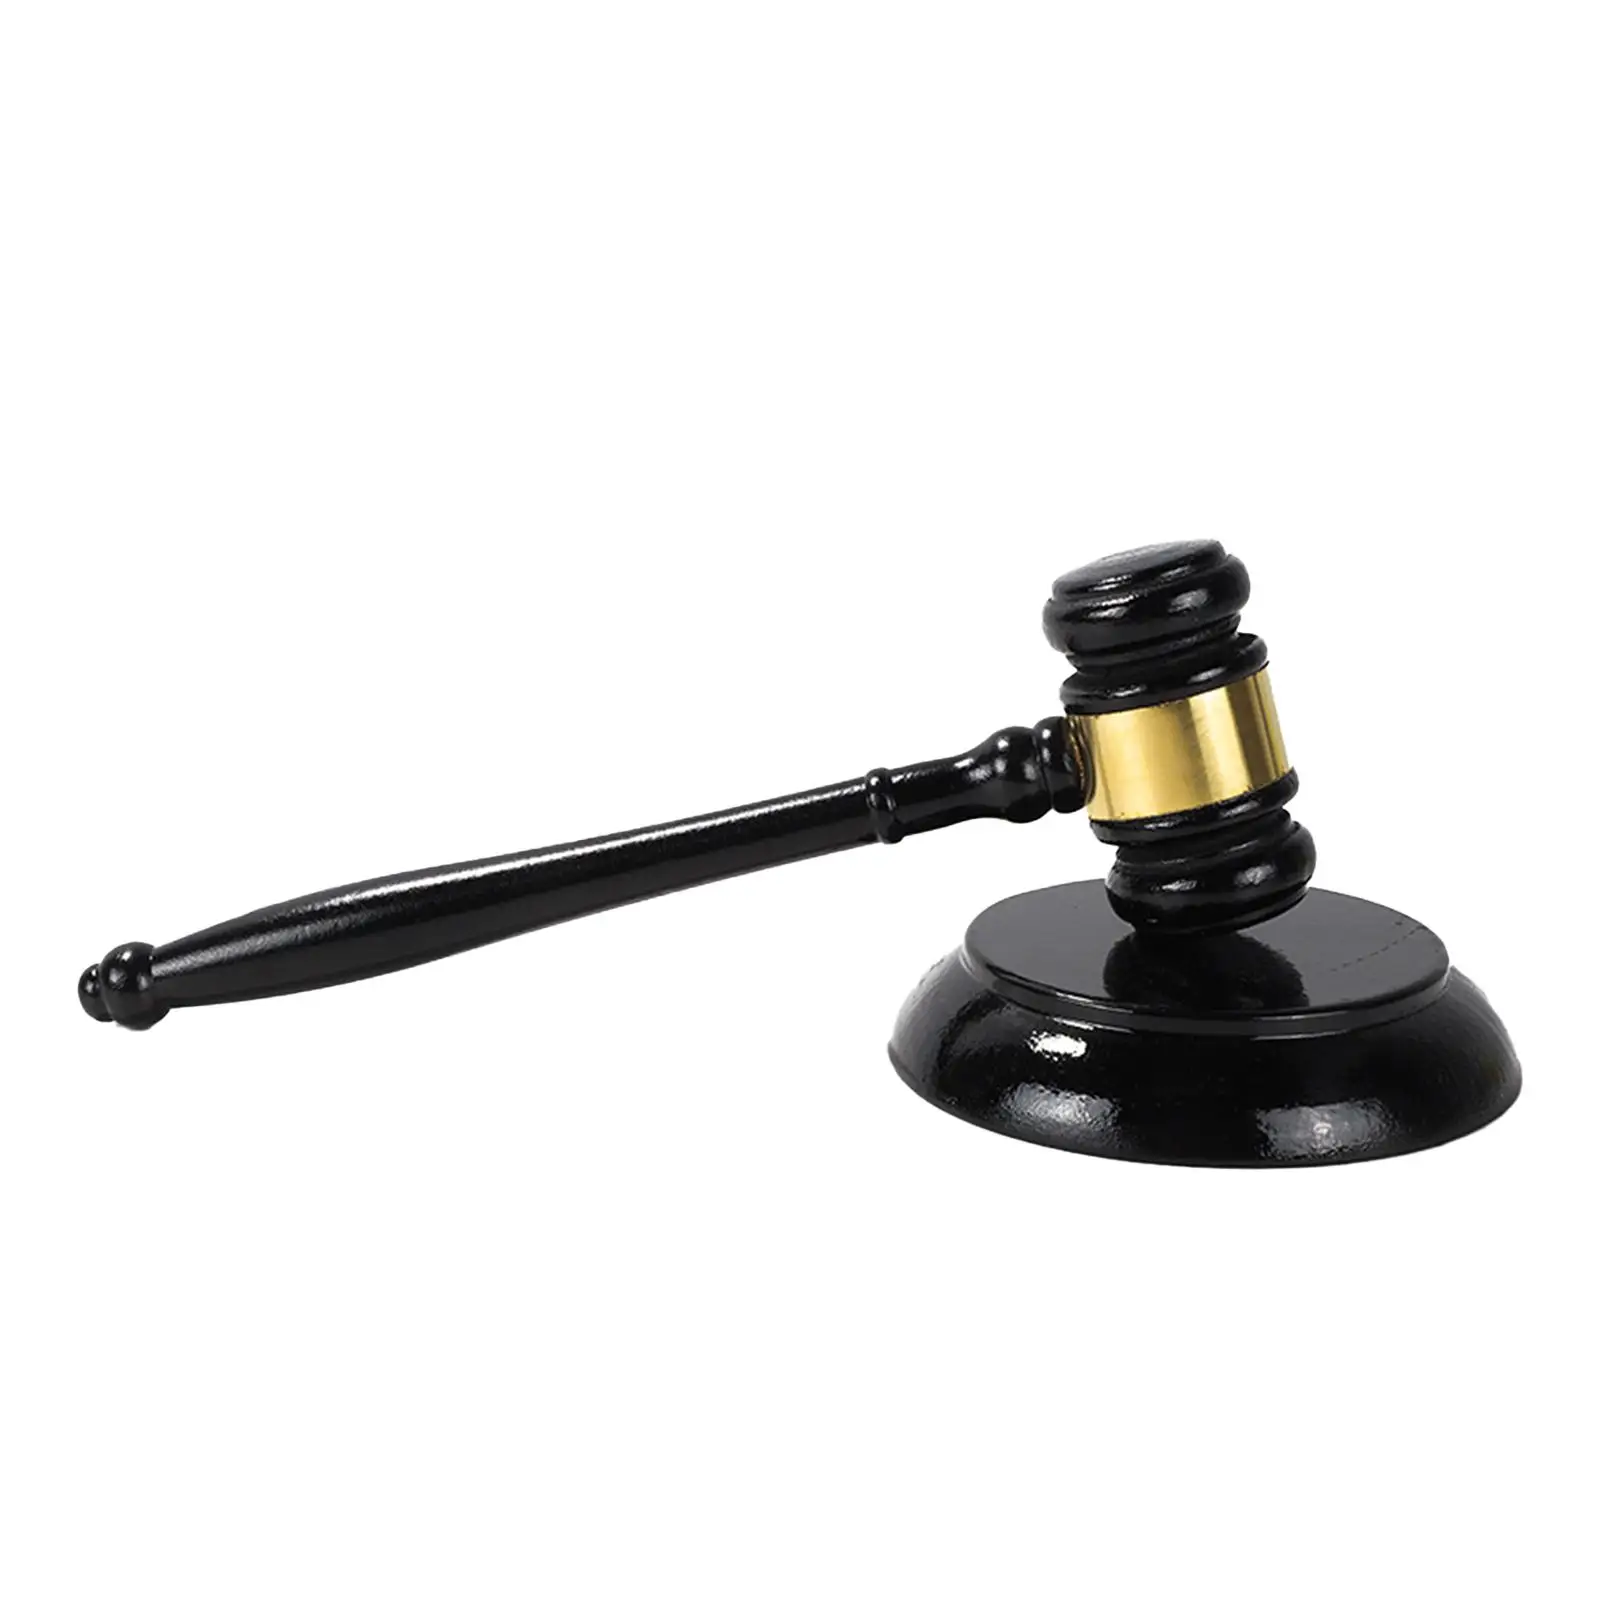 Wood Gavel and Block Set Gavel Toy for Costume Accessory Judge Unique Gifts